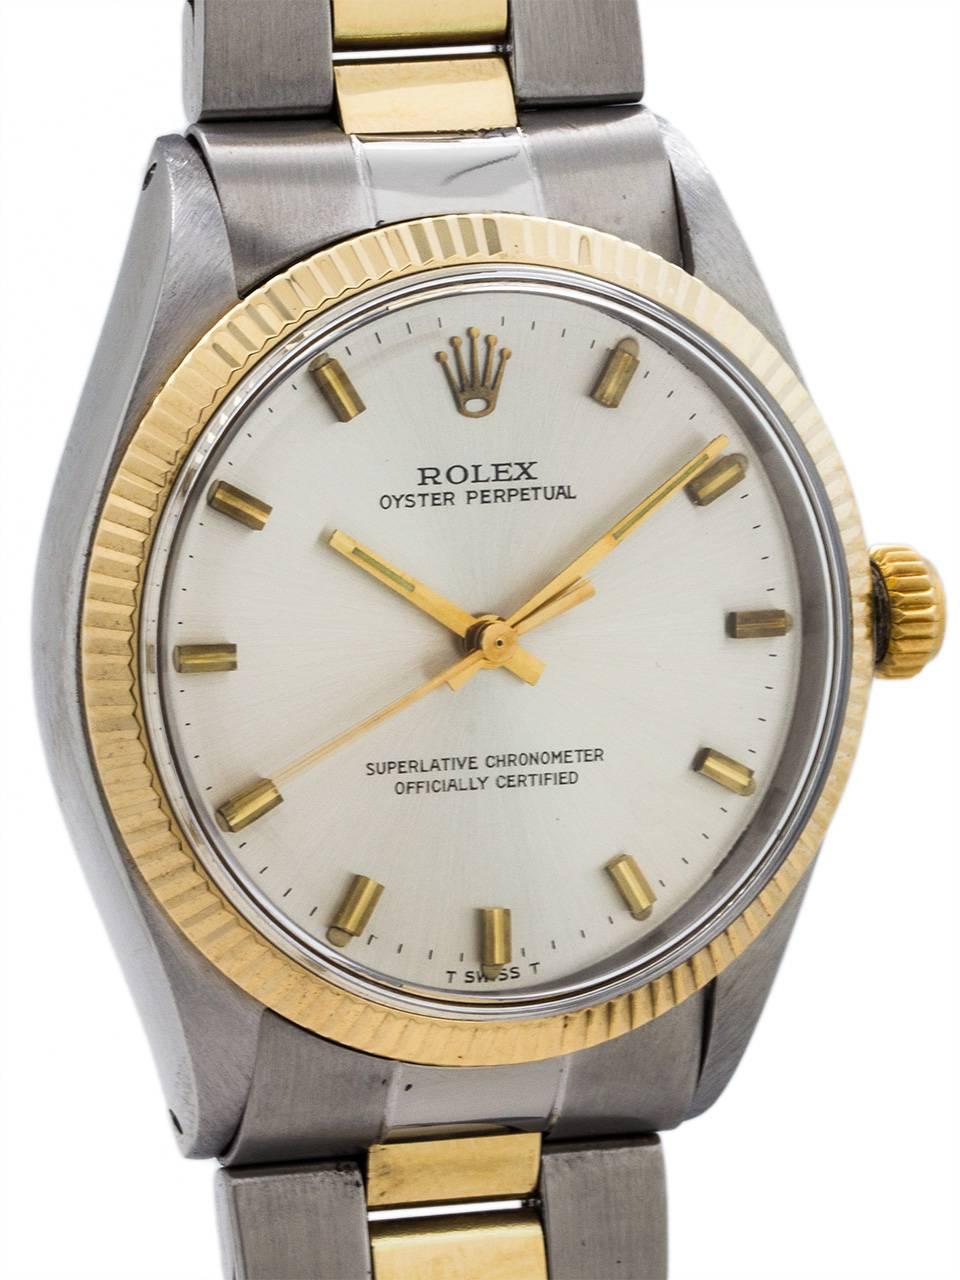 Modern Rolex Yellow Gold Stainless Steel Oyster Perpetual Wristwatch, circa 1971